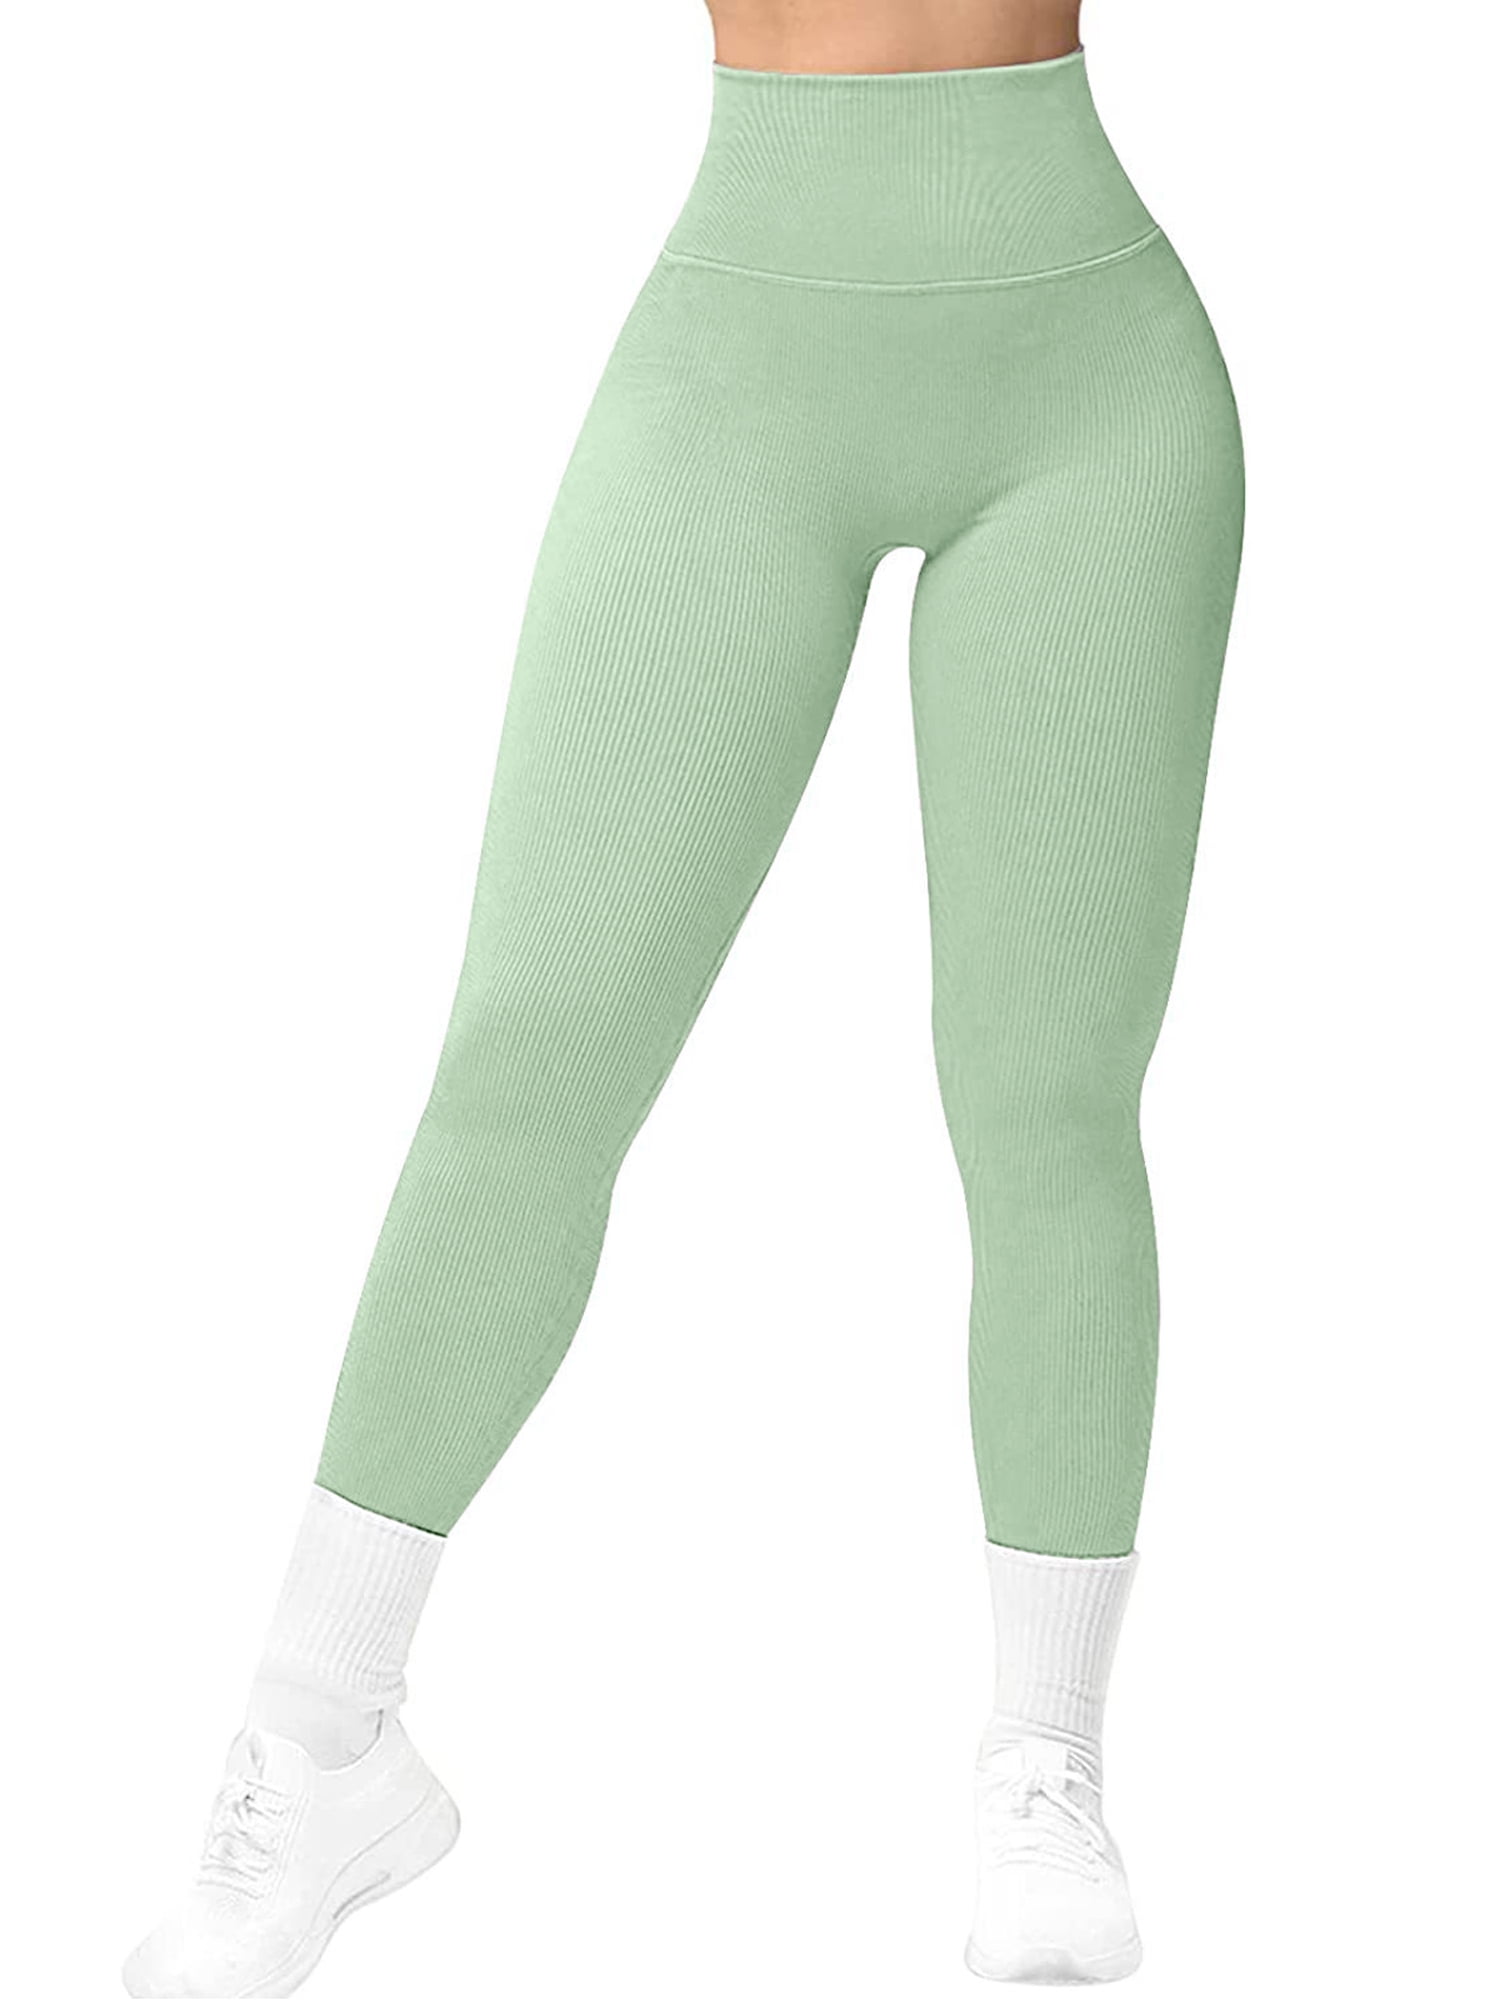 Soft Leggings for Women High Waisted Tummy Control No See